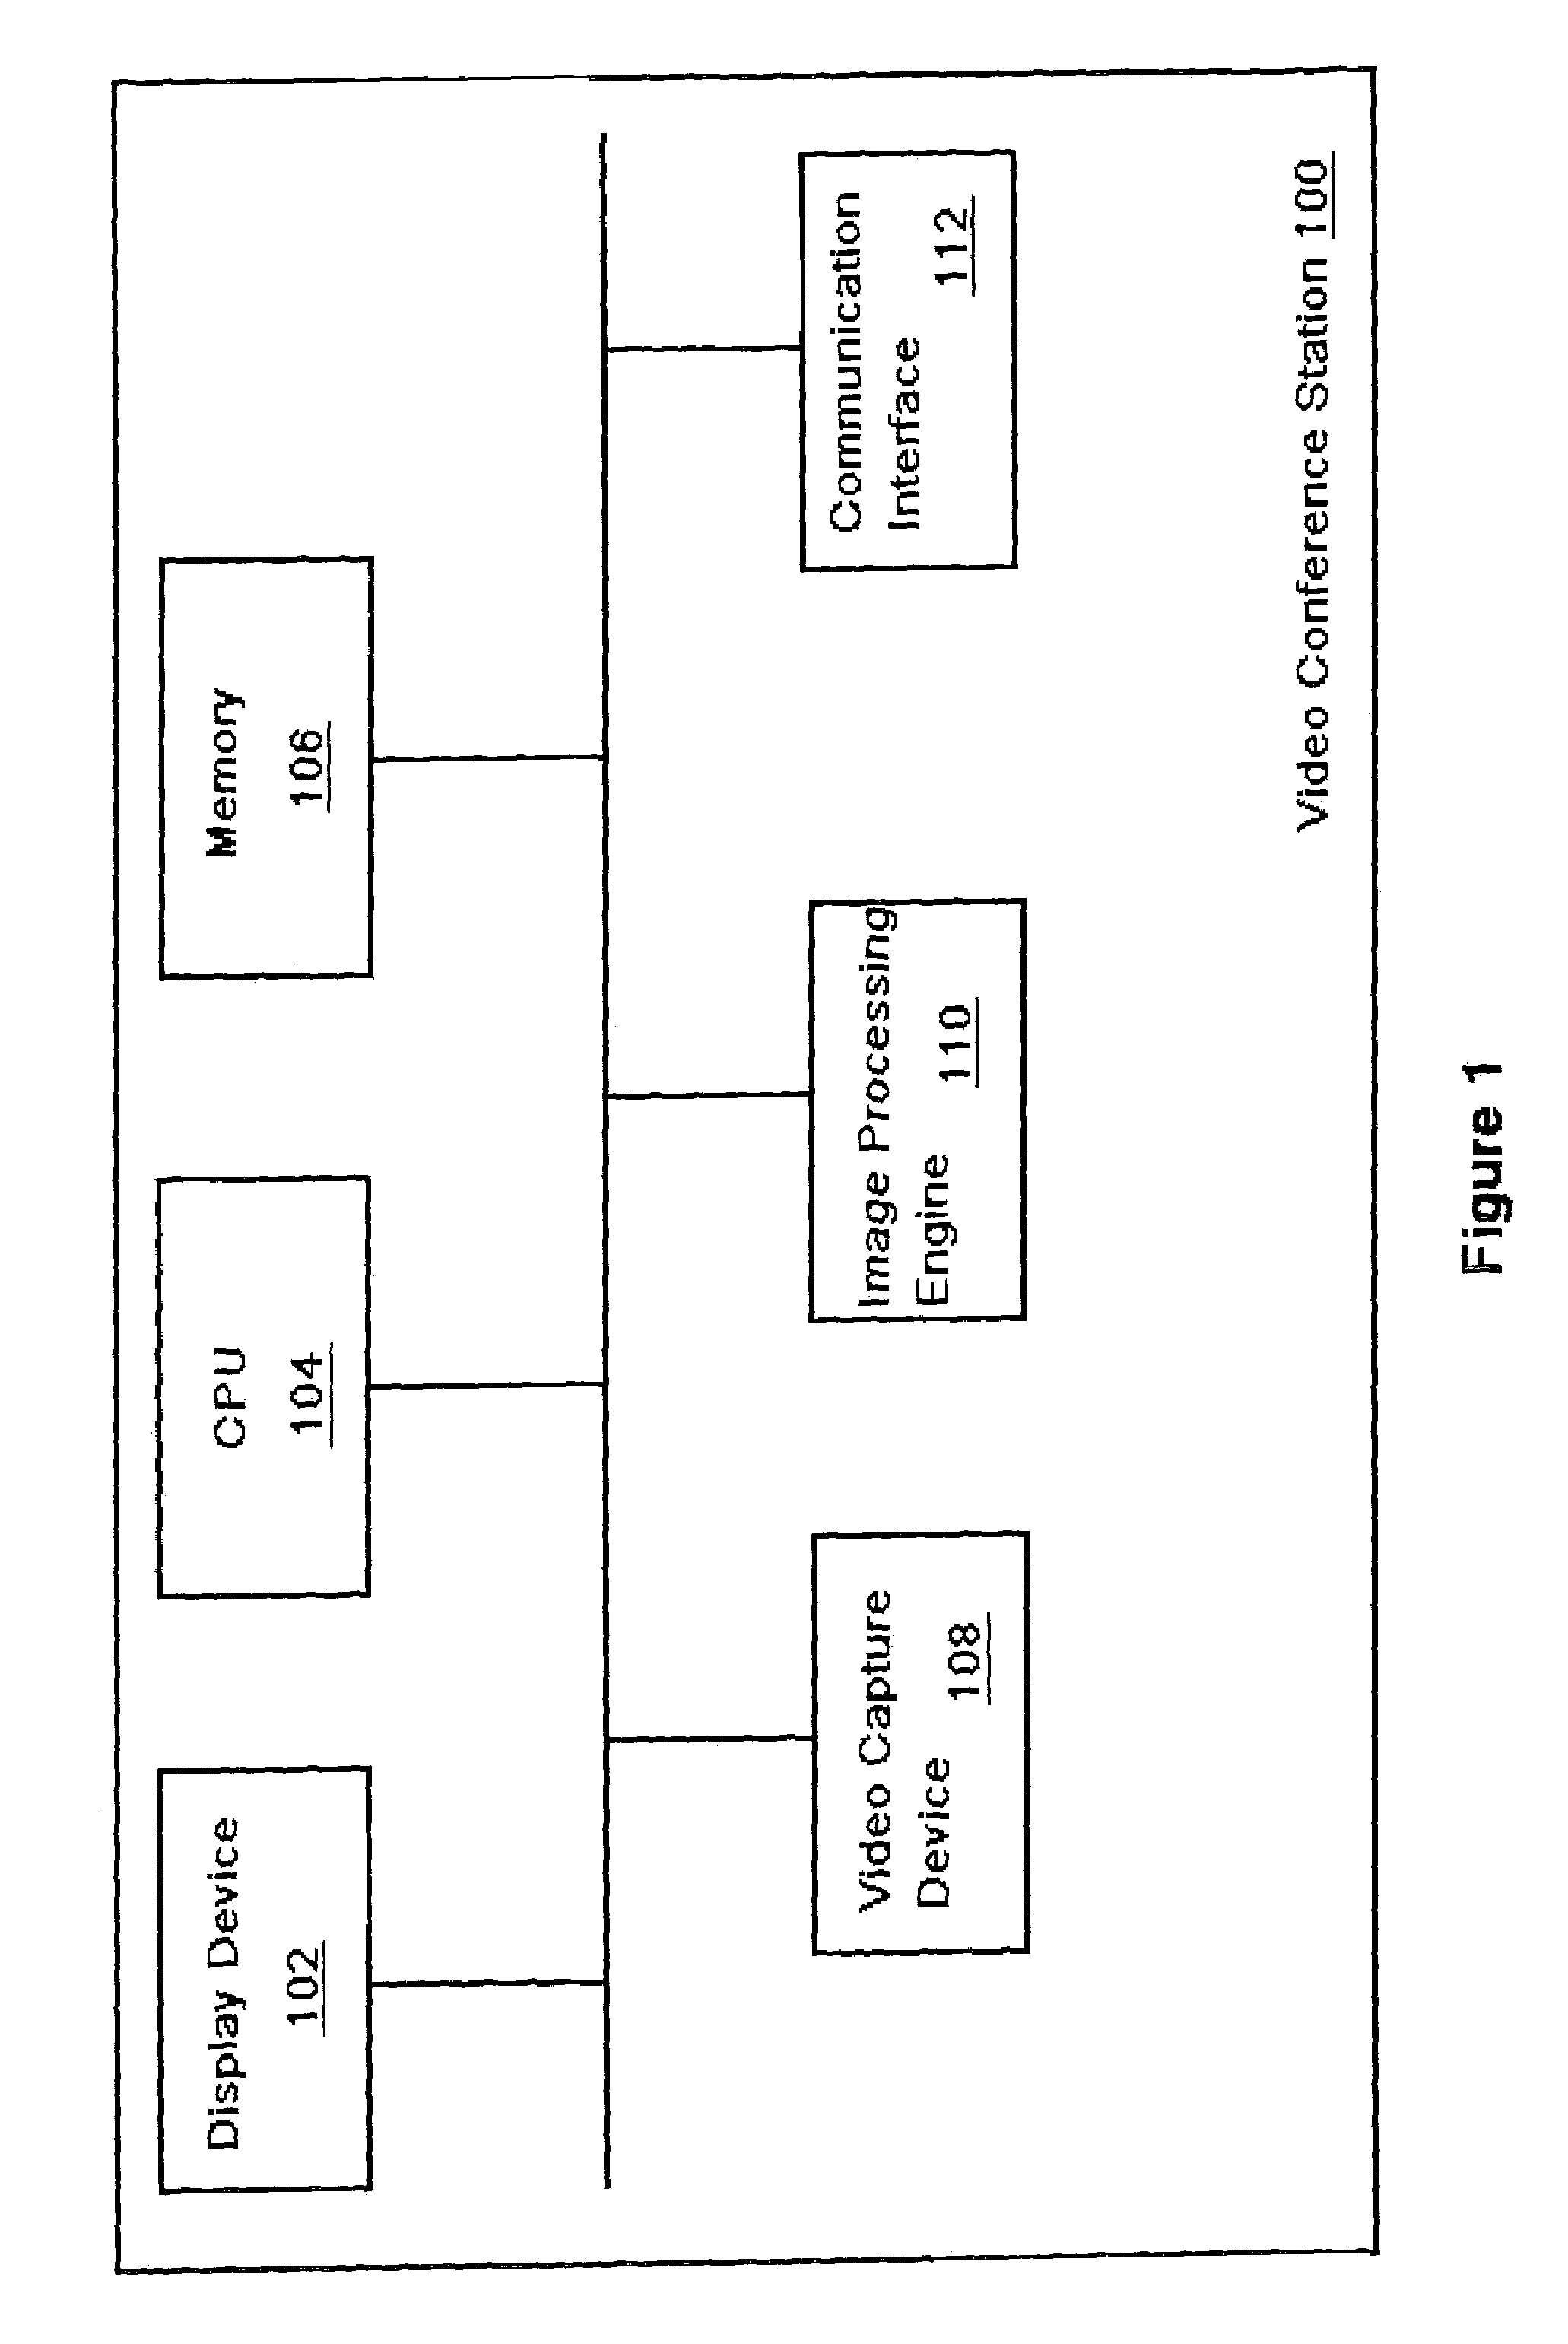 Graphical user interface for video feed on videoconference terminal